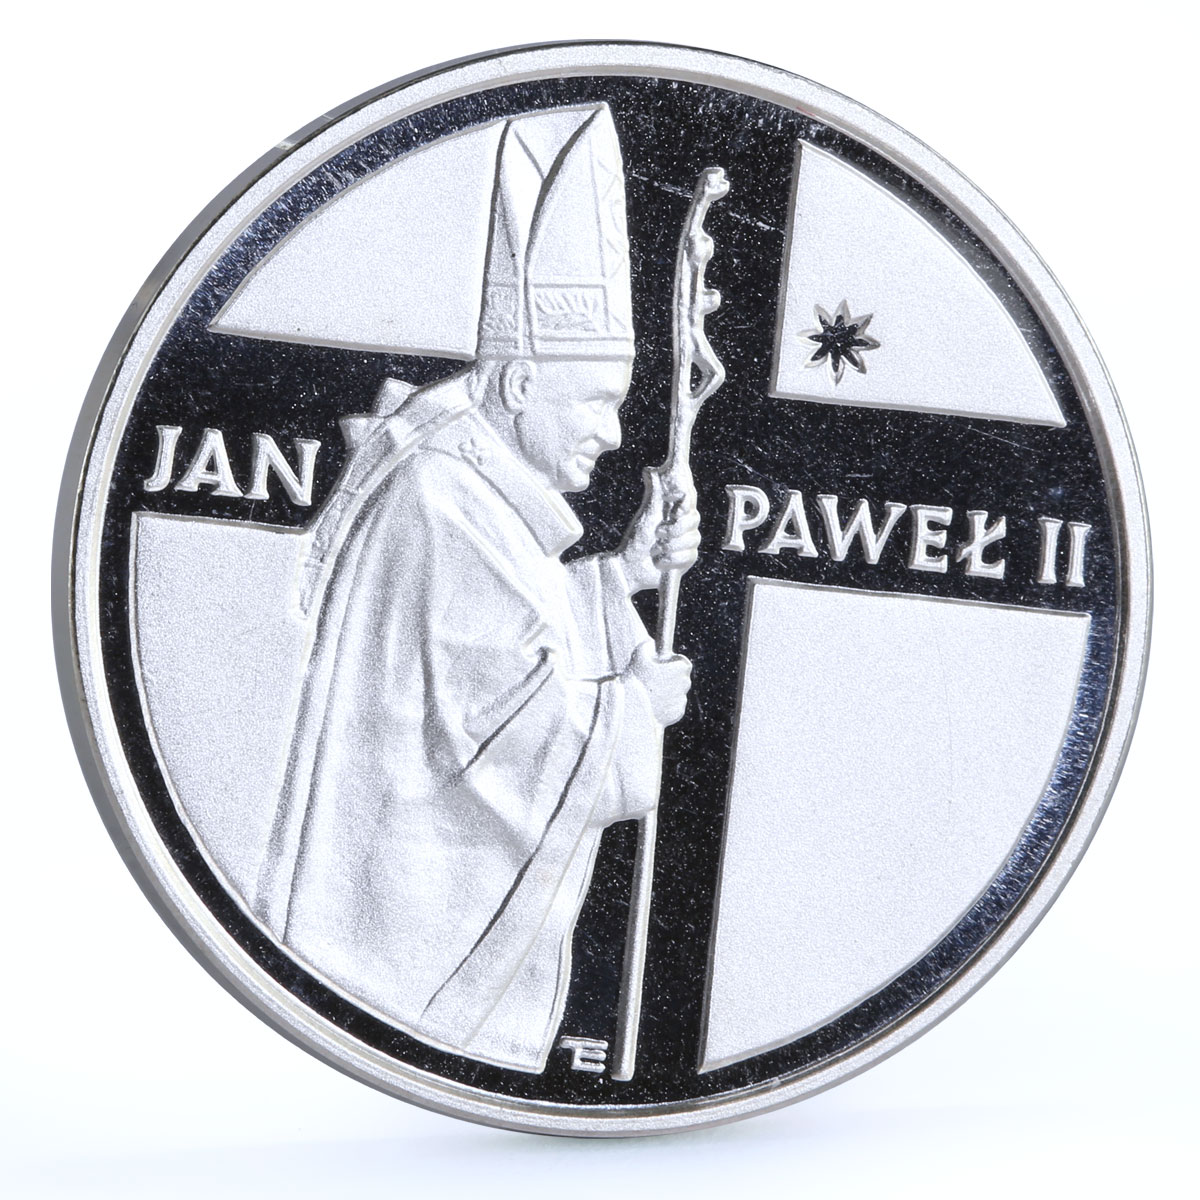 Poland 10000 zlotych Vatican Pope Jan Paul II proof silver piedfort coin 1989